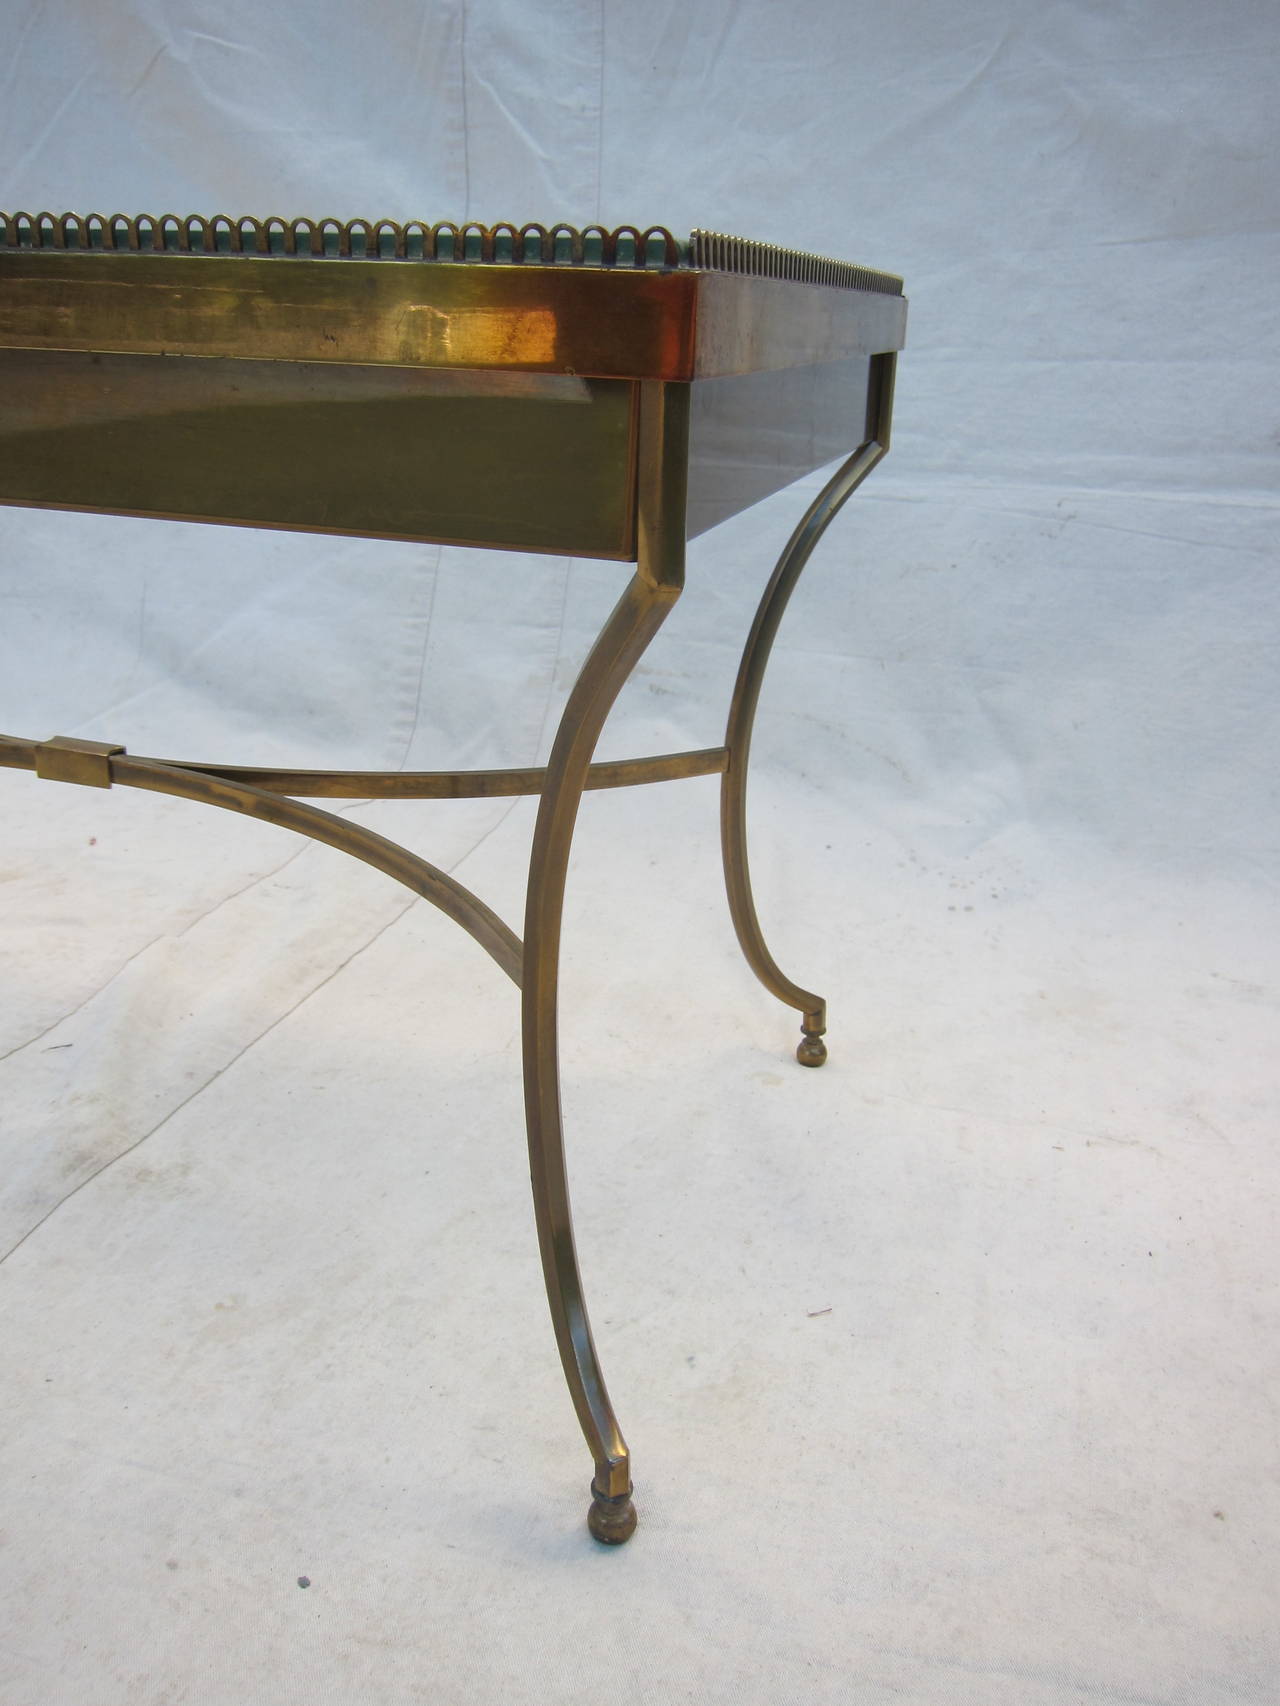 20th century brass table with two shelfs of glass, a tray top with galleried edge detail, and display space. Wonderful solid brass small-scale cocktail table with compartment or tray use. Top removes when pulled up with light force.  Very good